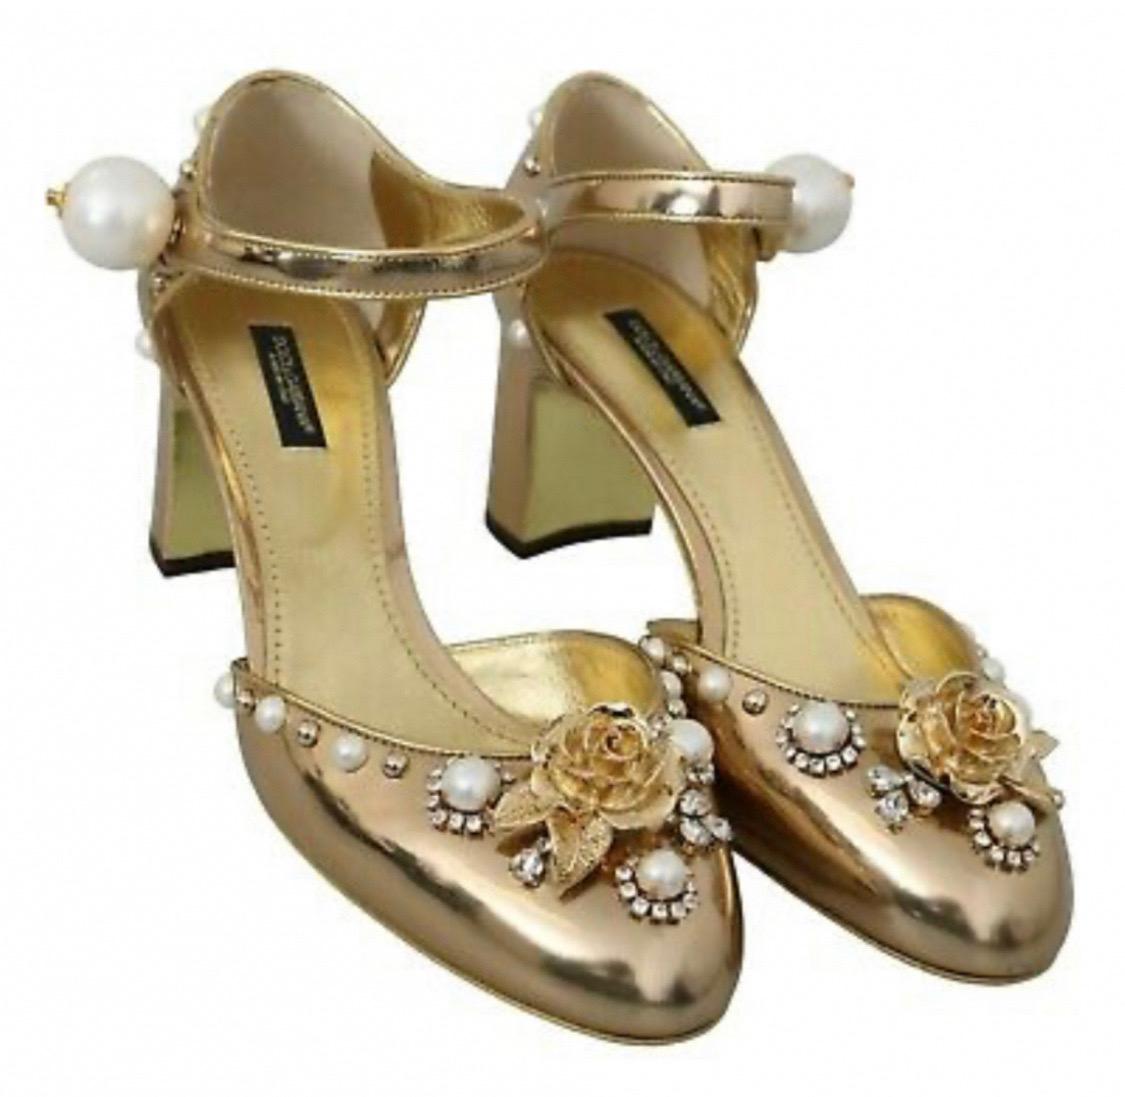 Dolce & Gabbana gold leather ankle strap sandals shoes heels  7